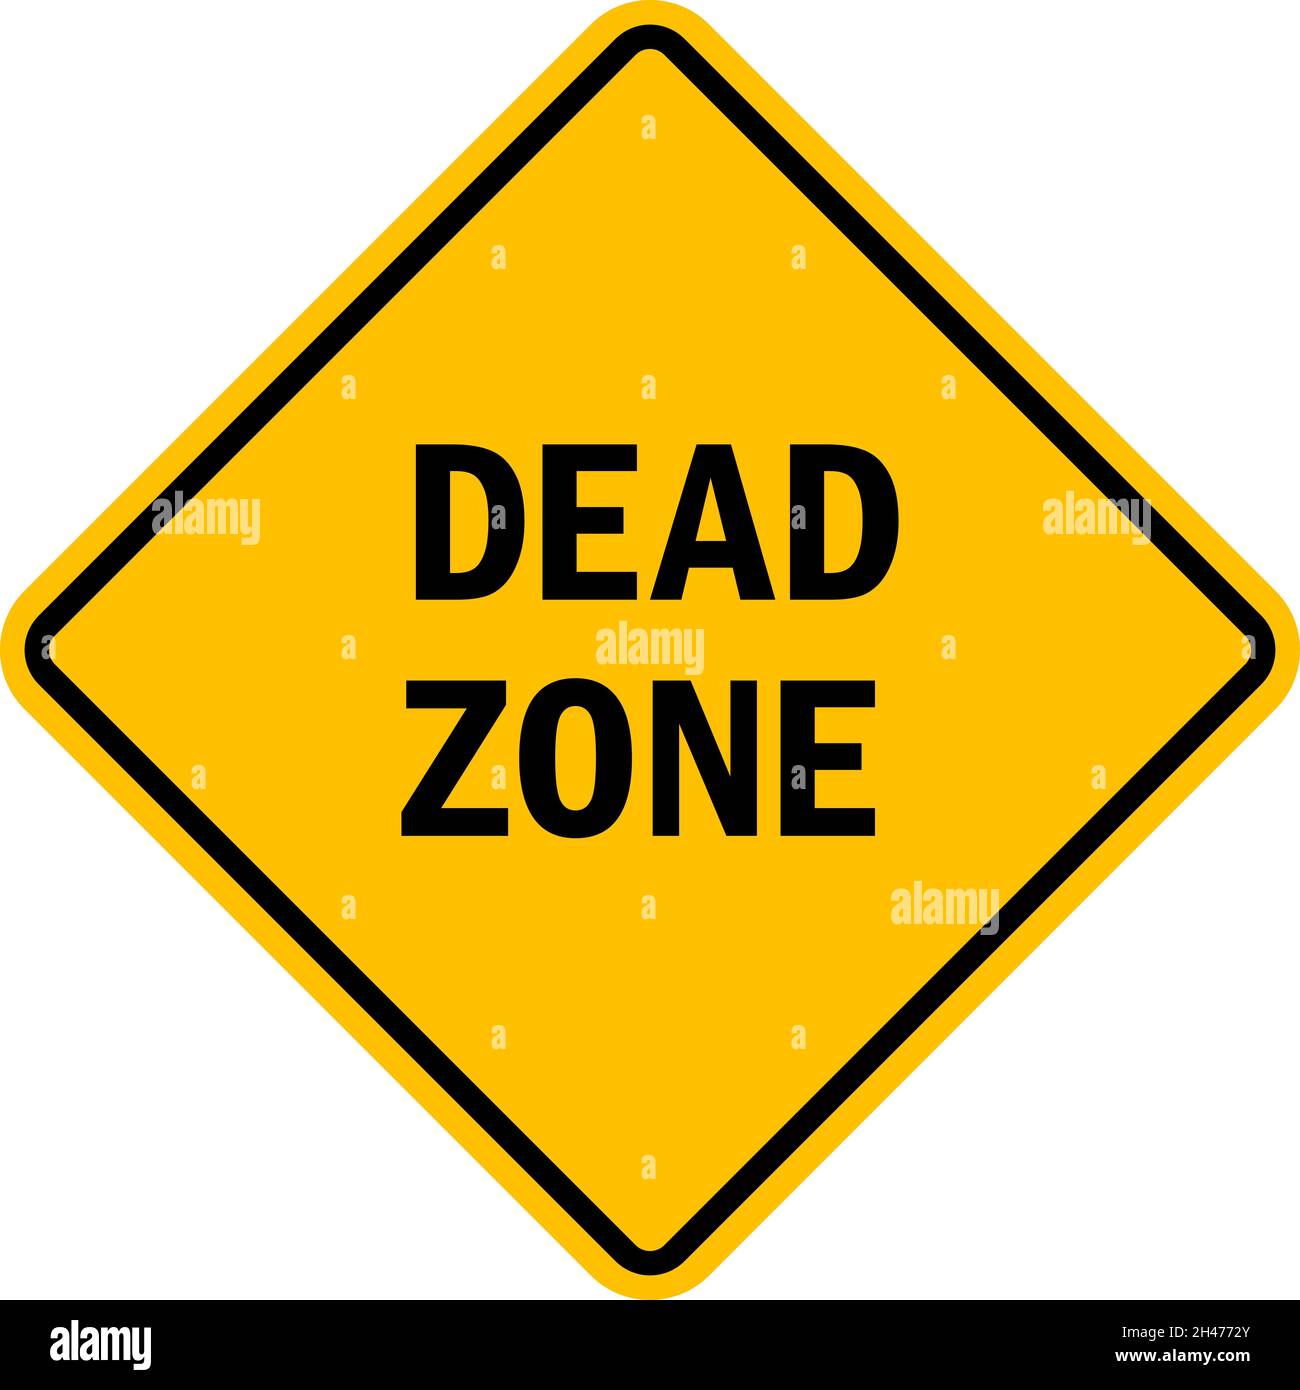 Dead zone sign. Black on yellow diamond background. Road signs and symbols. Stock Vector